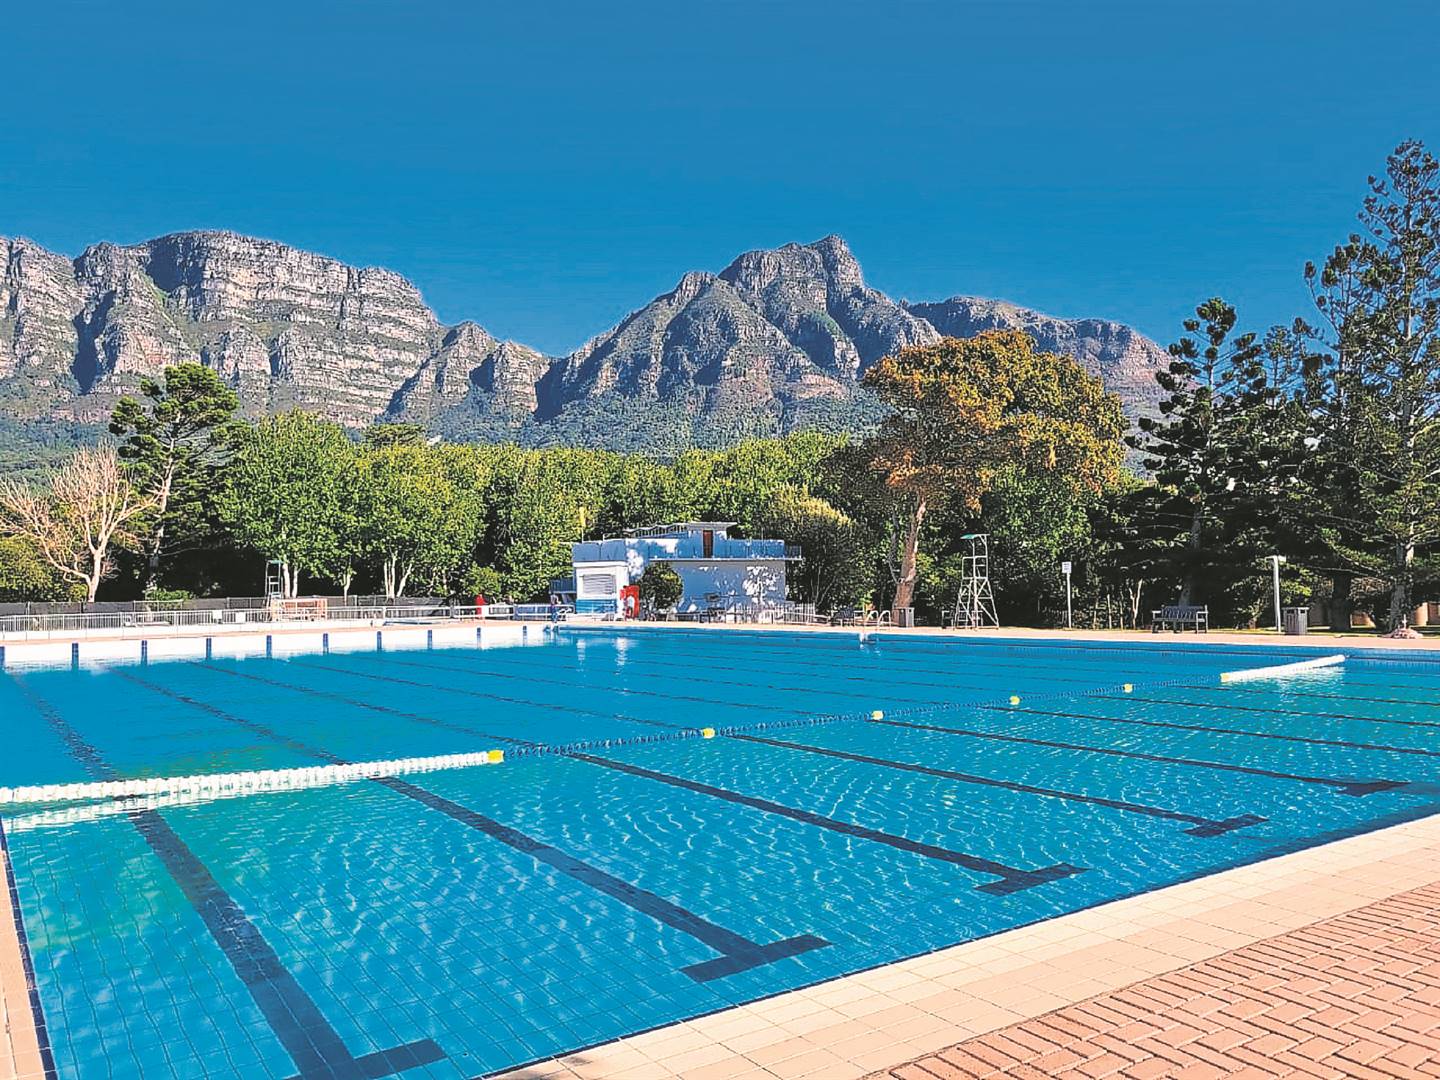 City of Cape Town gradually opens swimming pools across the